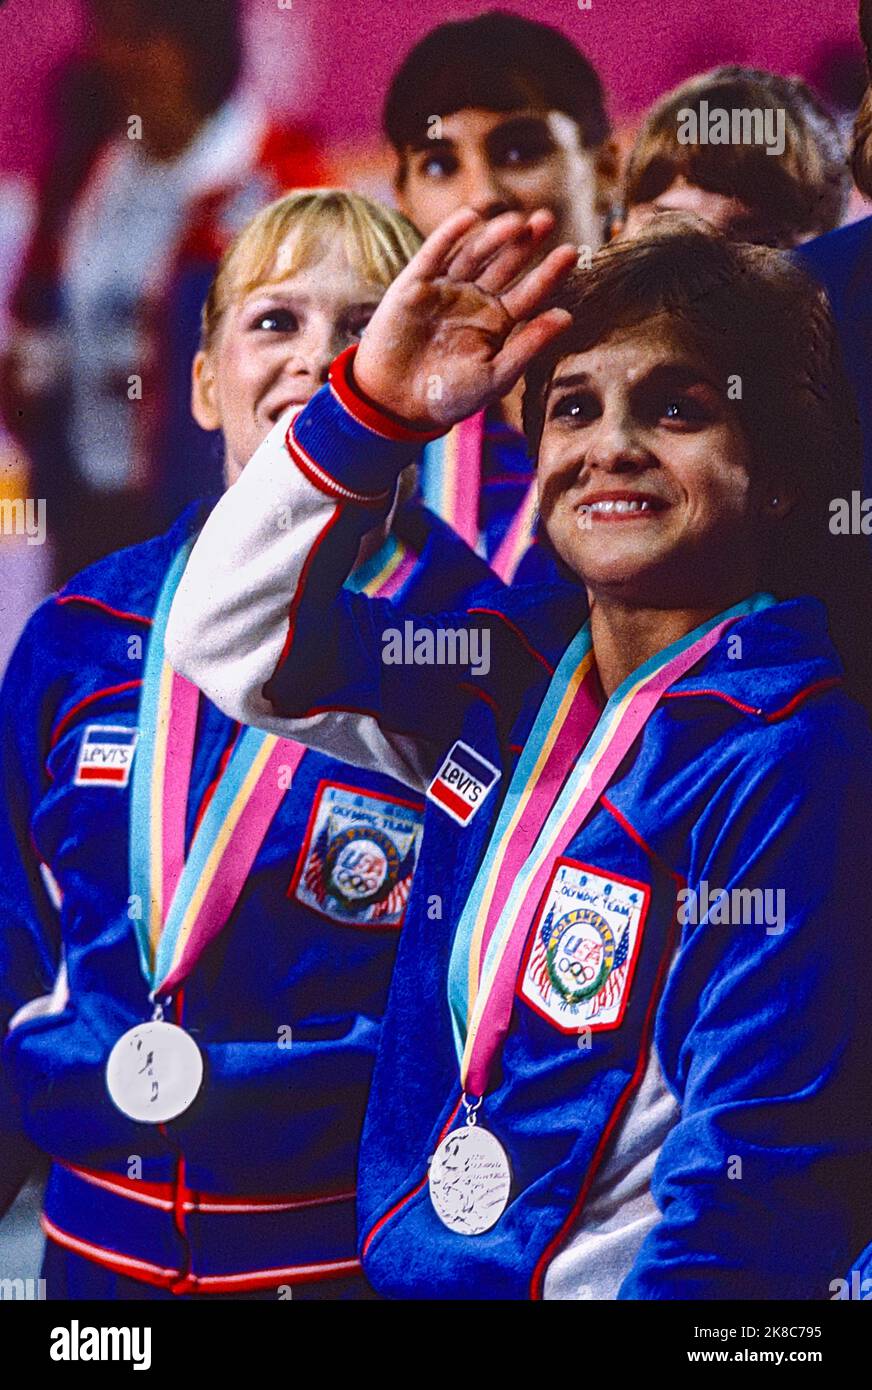 Mary Lou Retton (USA) competes at the 1984 Olympics. Stock Photo